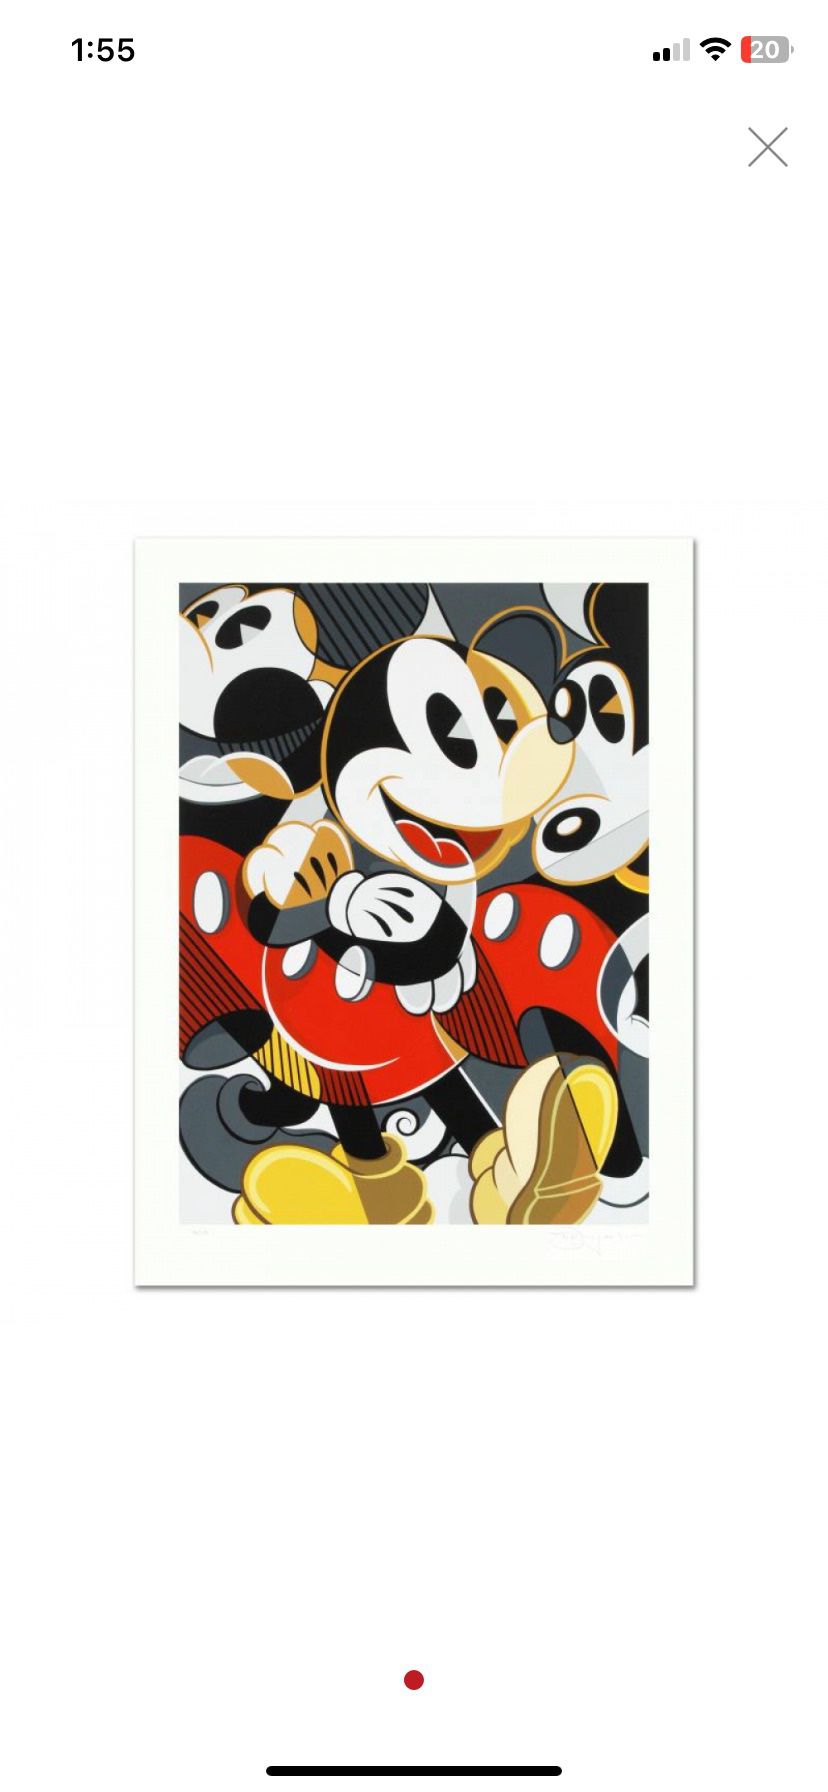 Tim Rogerson Signed "Mousing Around #3" Sold-Out Numbered LE 19x25 Disney Fine Art Serigraph